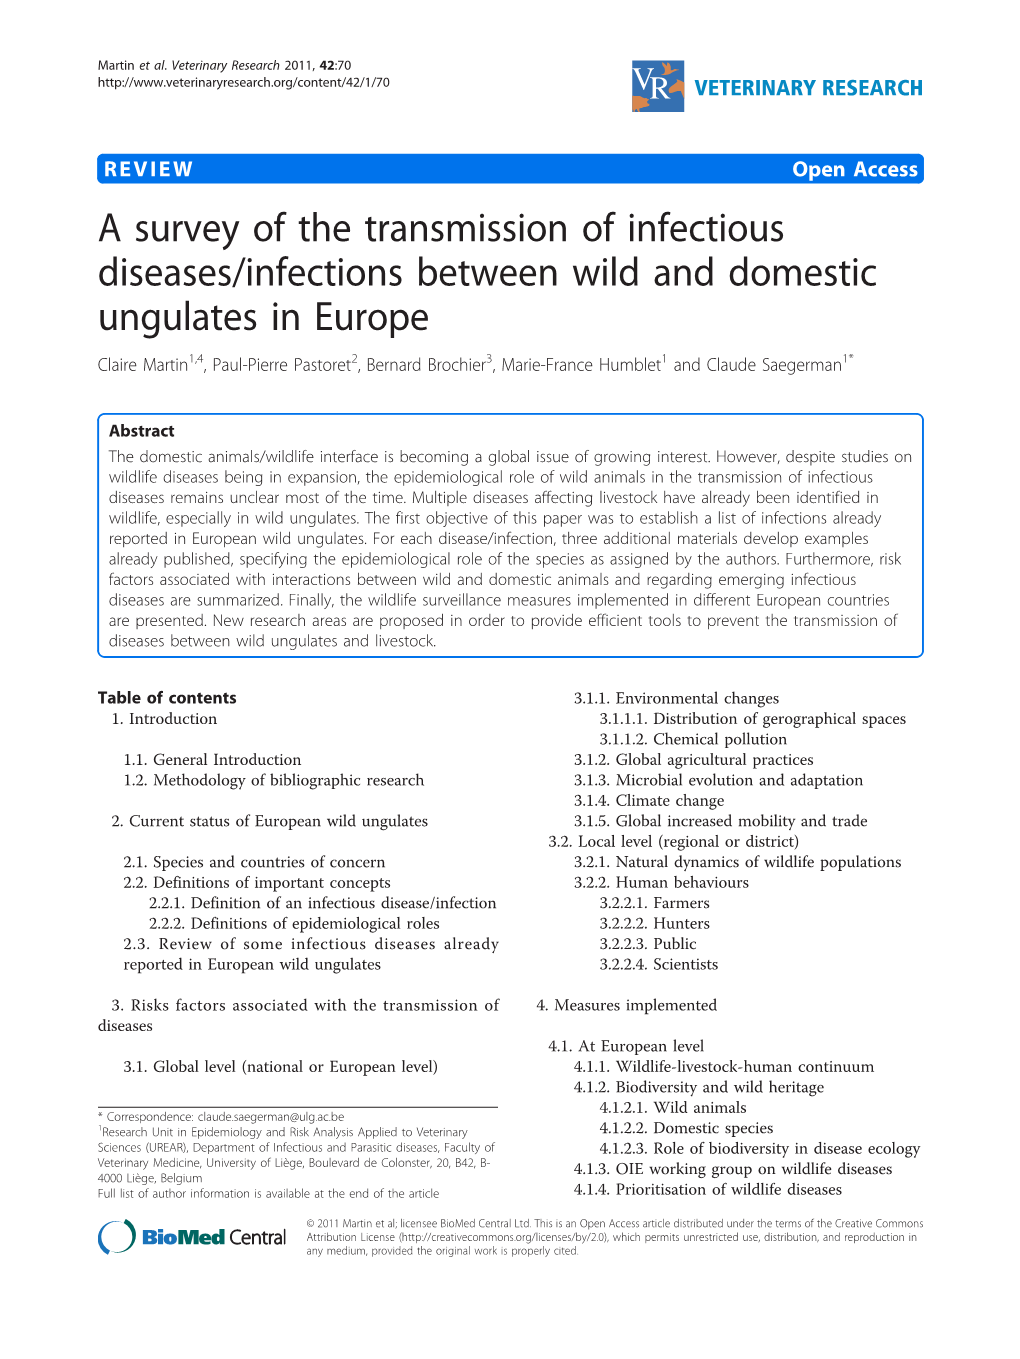 A Survey of the Transmission of Infectious Diseases/Infections